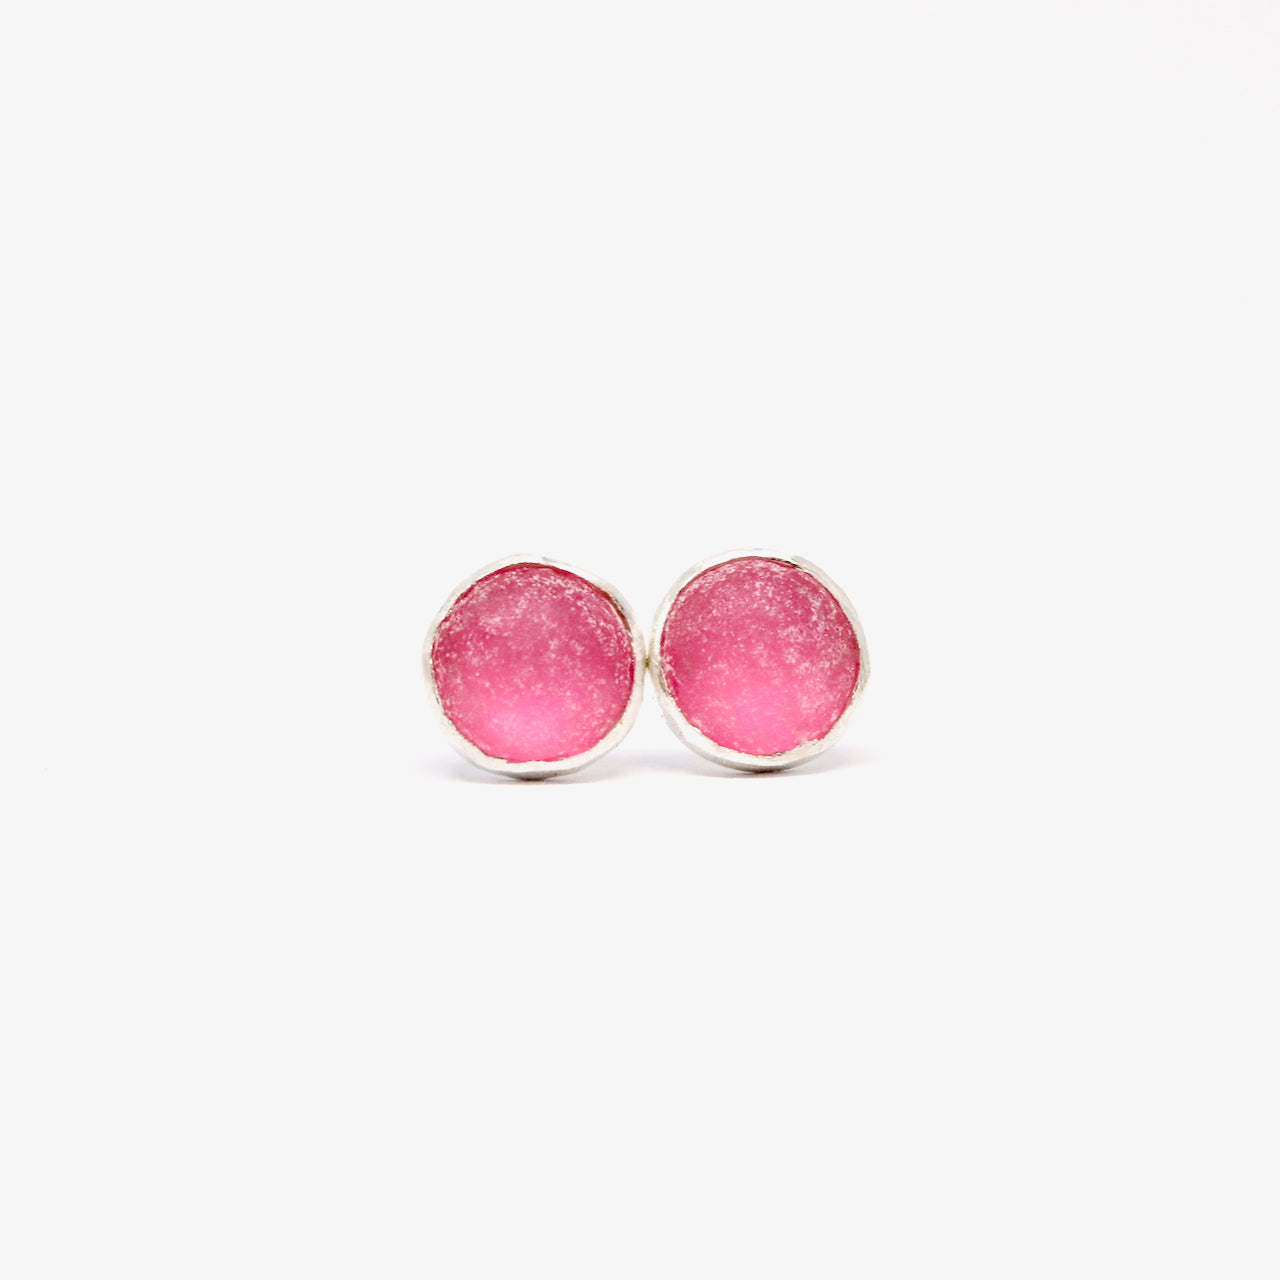 Bright Pink stud earrings. Hand made jewellery by Wānaka artist and jeweller Briar Hardy-Hesson.